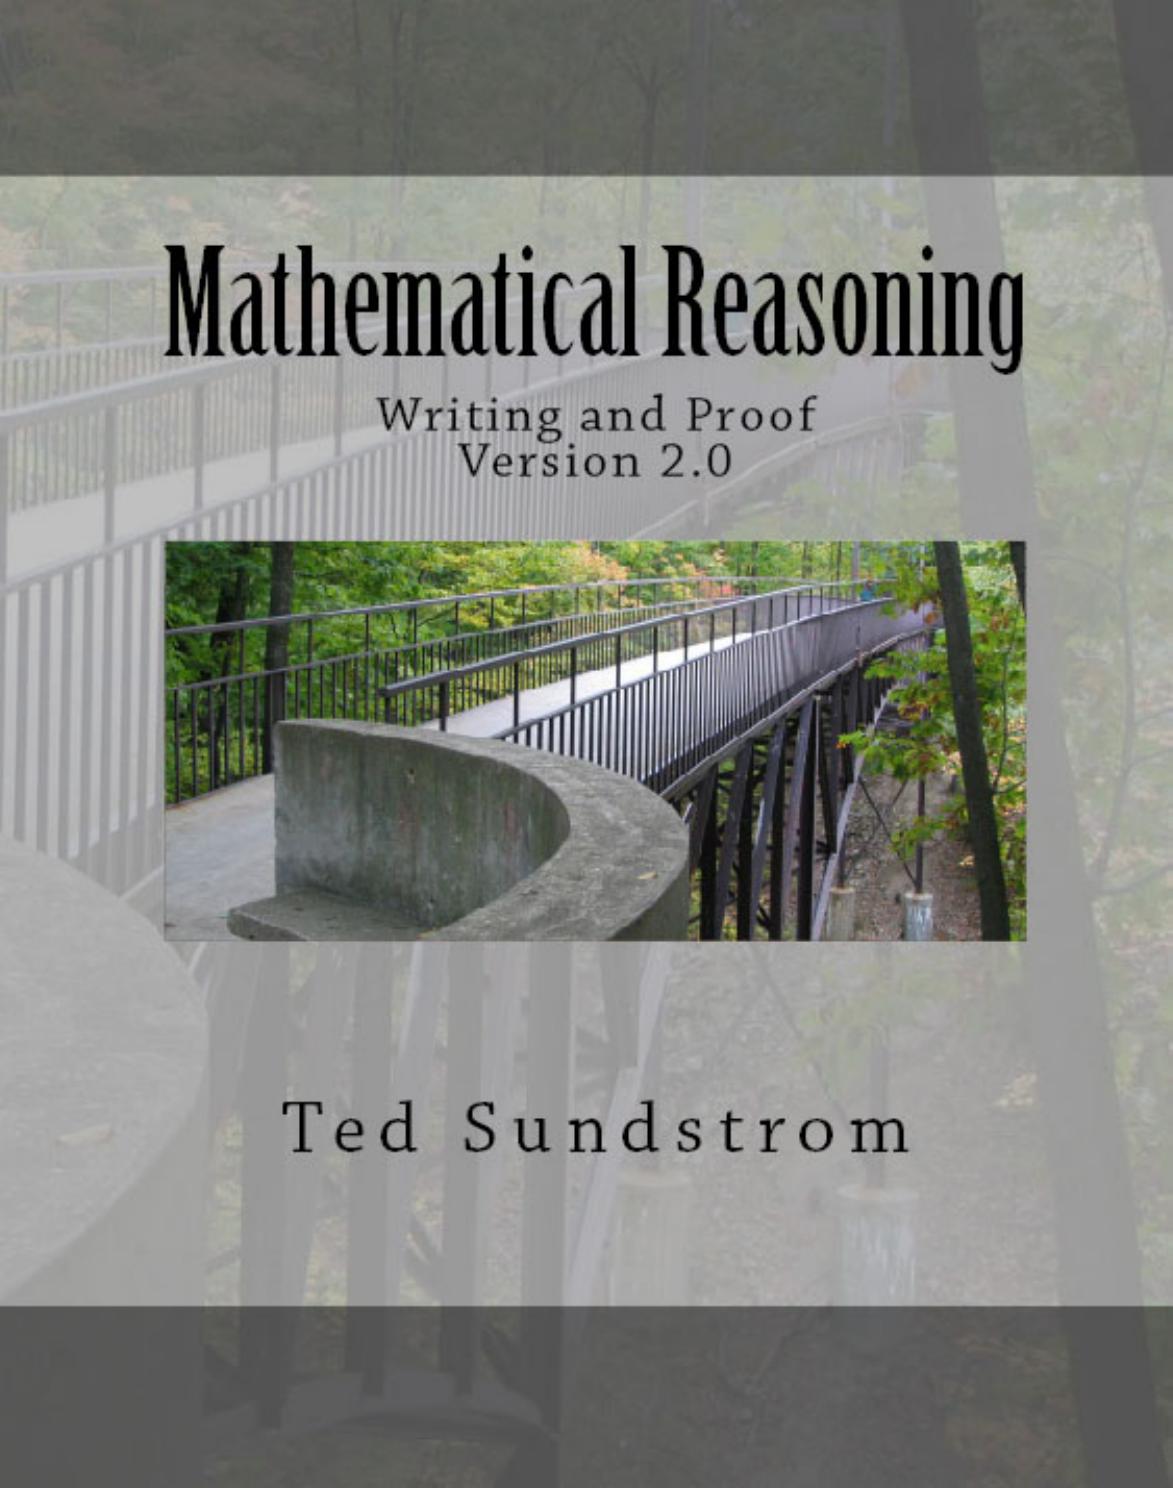 Mathematical Reasoning: Writing and Proof, Version 2.0